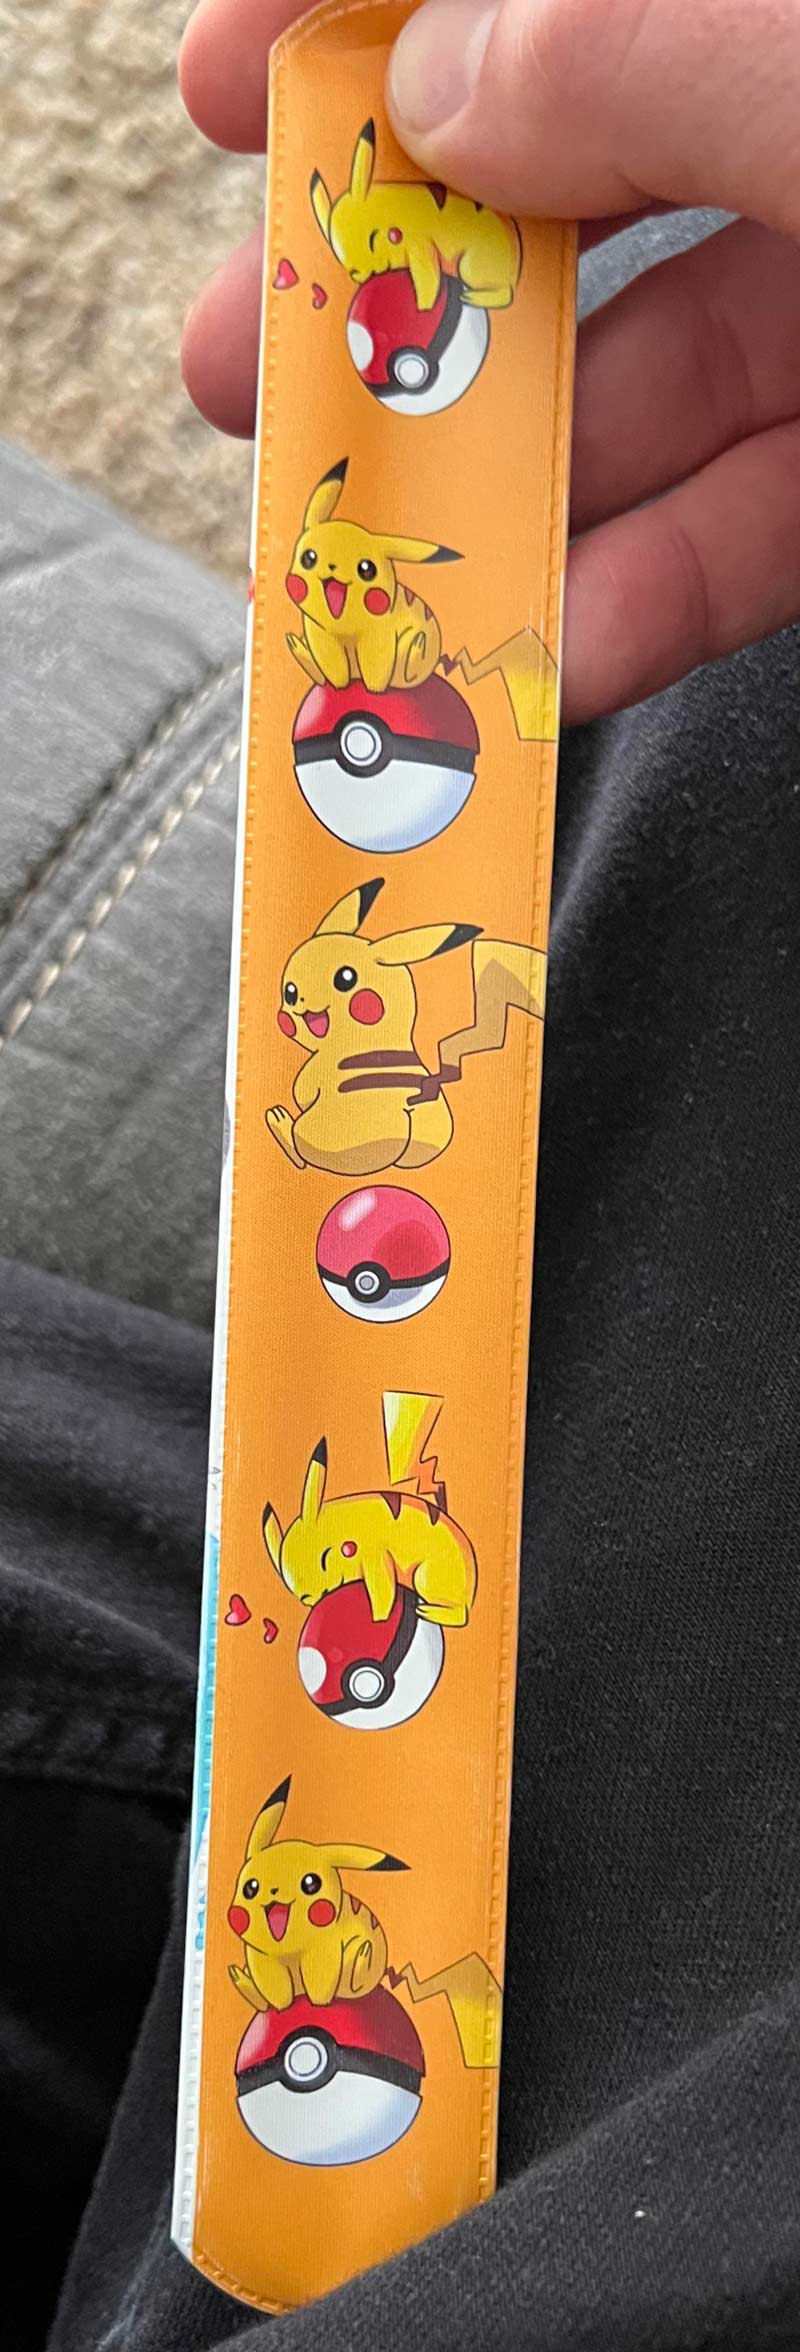 Party favors at a kindergarten birthday party featuring “Thicc-achu”